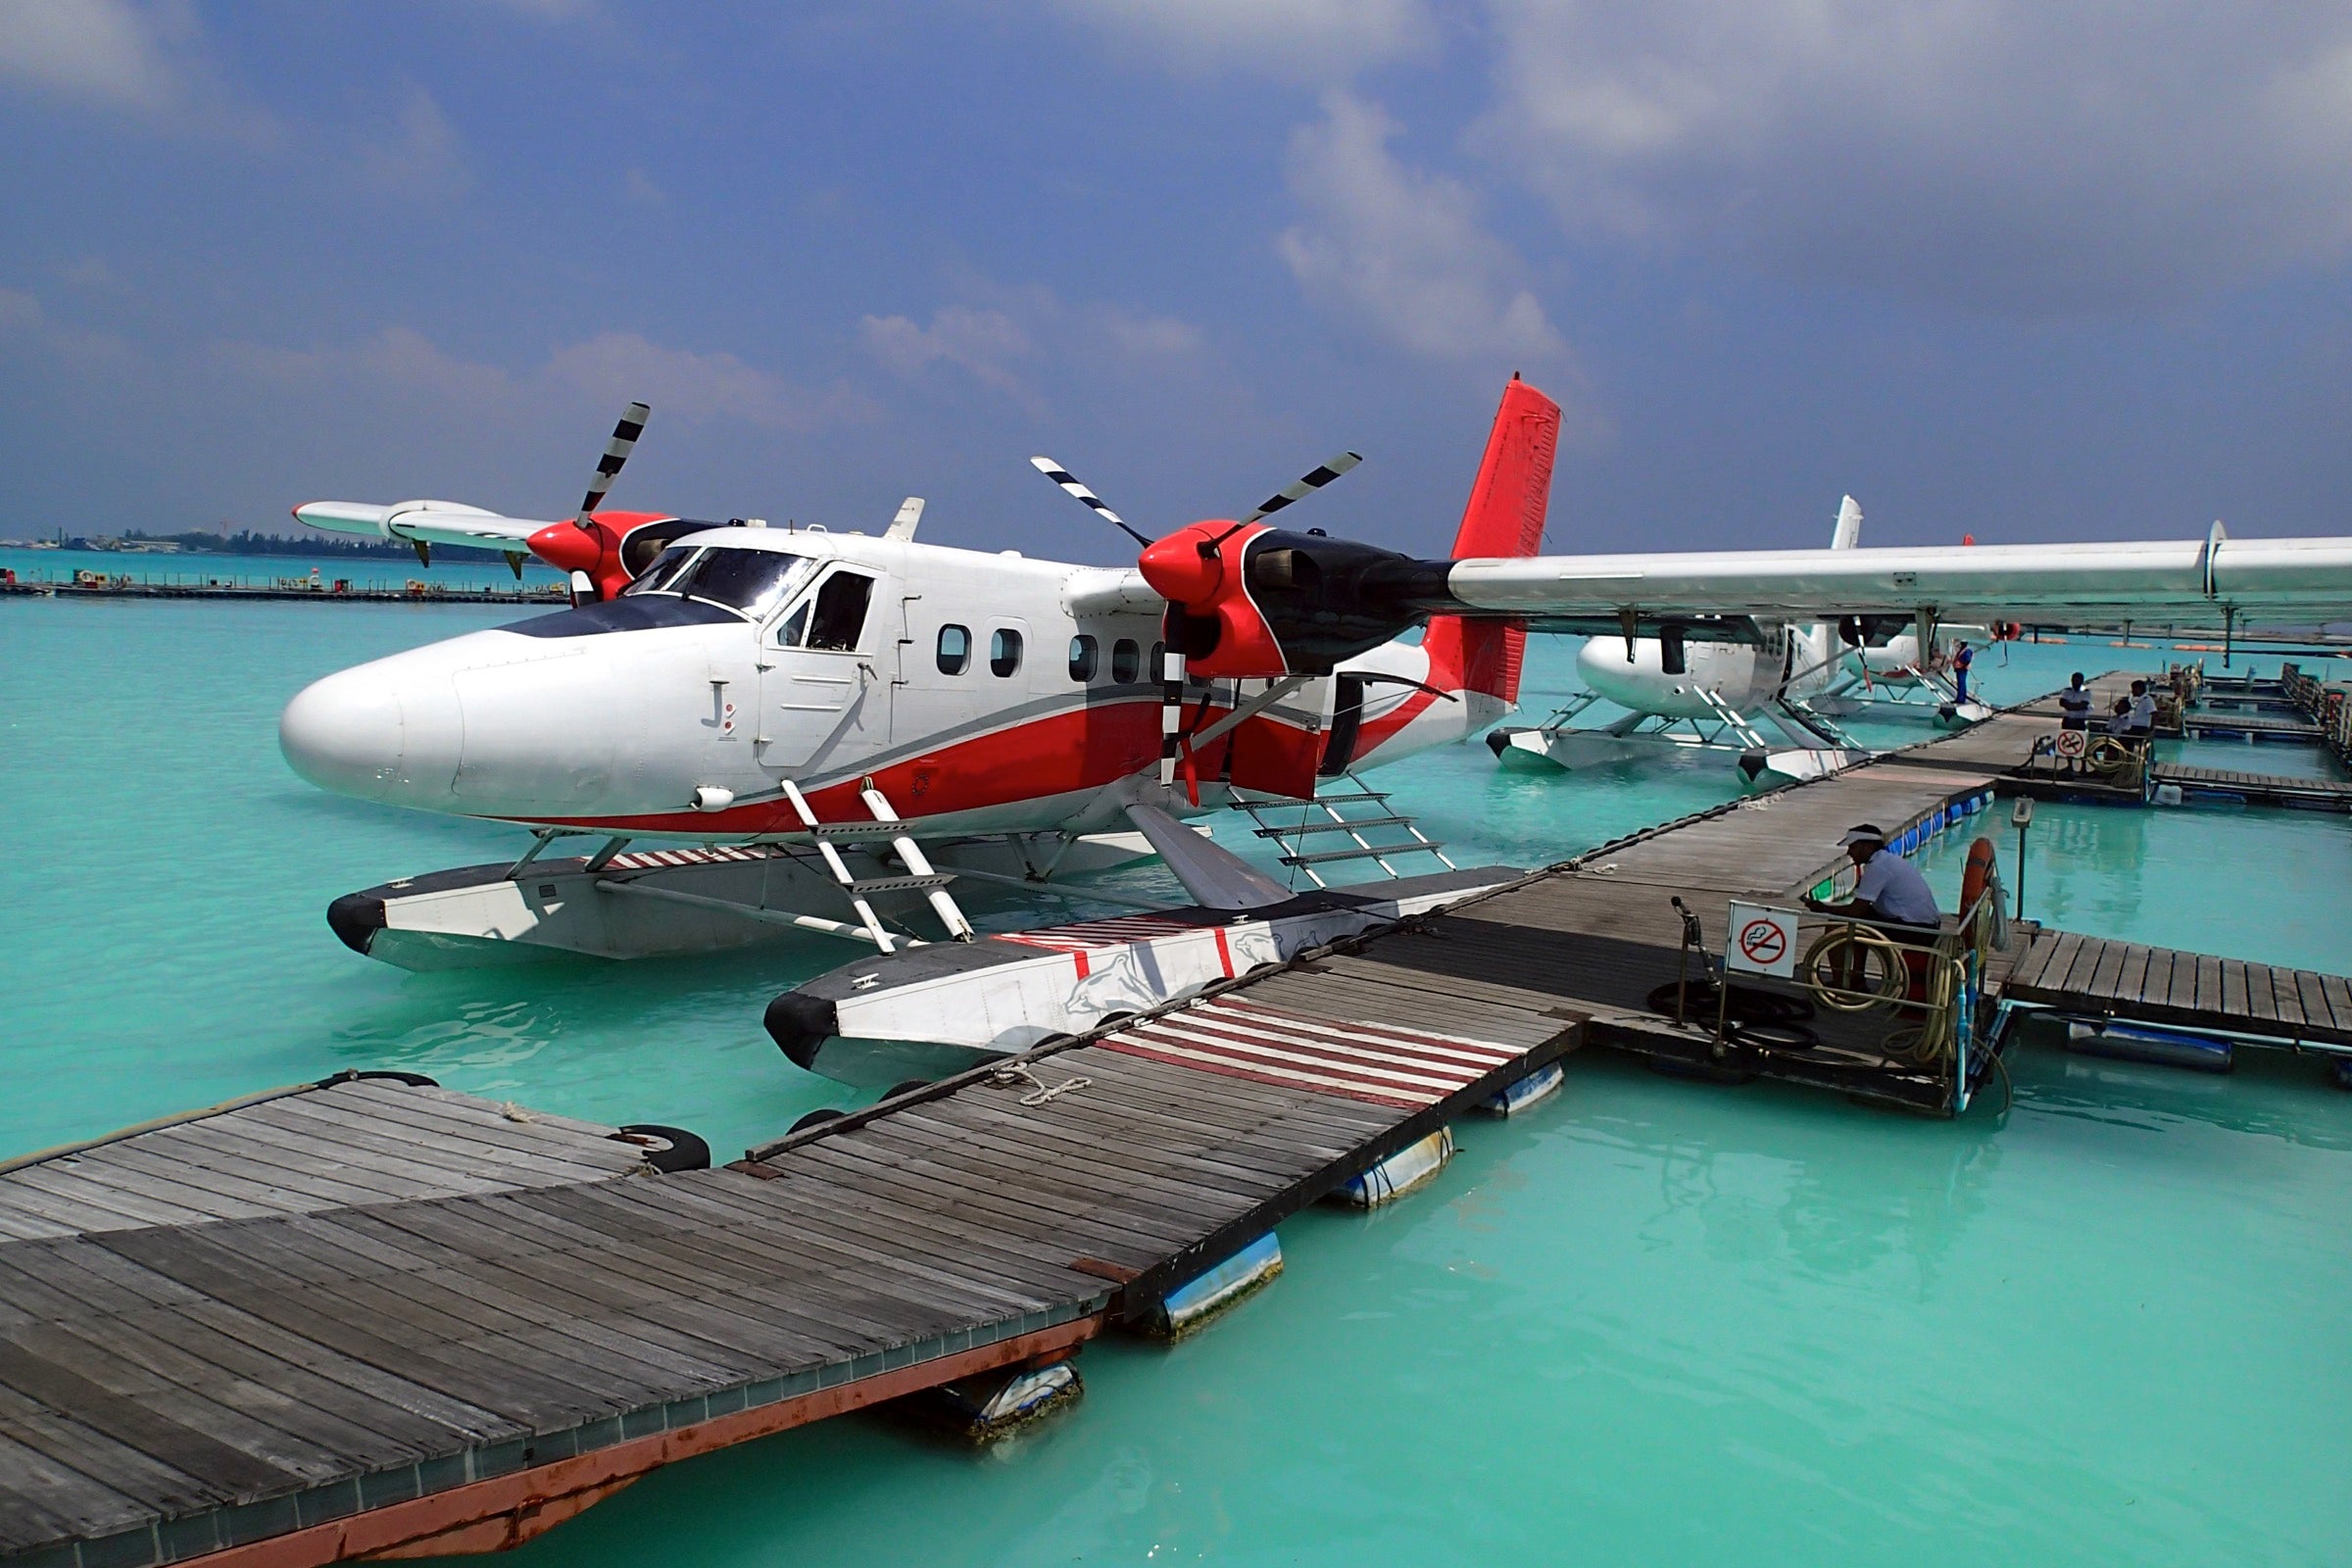 A red and white seaplane docked in the Maldives